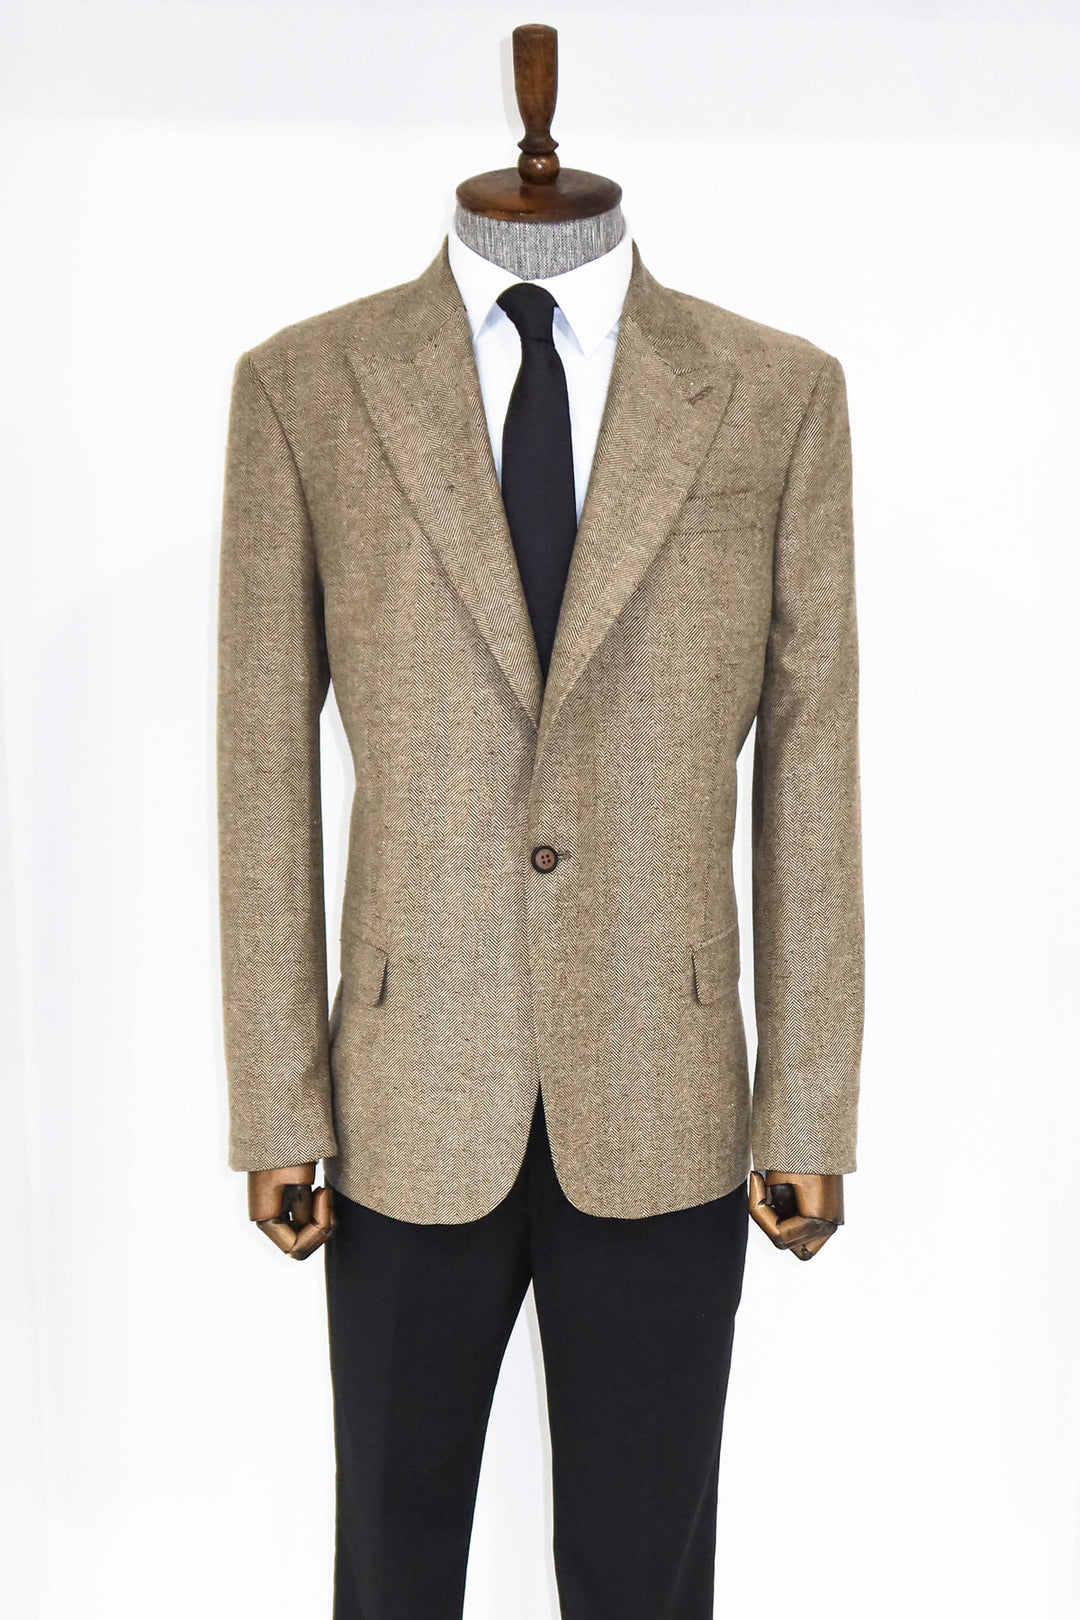 Houndstooth Pattern Wool Cream Men Blazer and Trousers Combination - Wessi